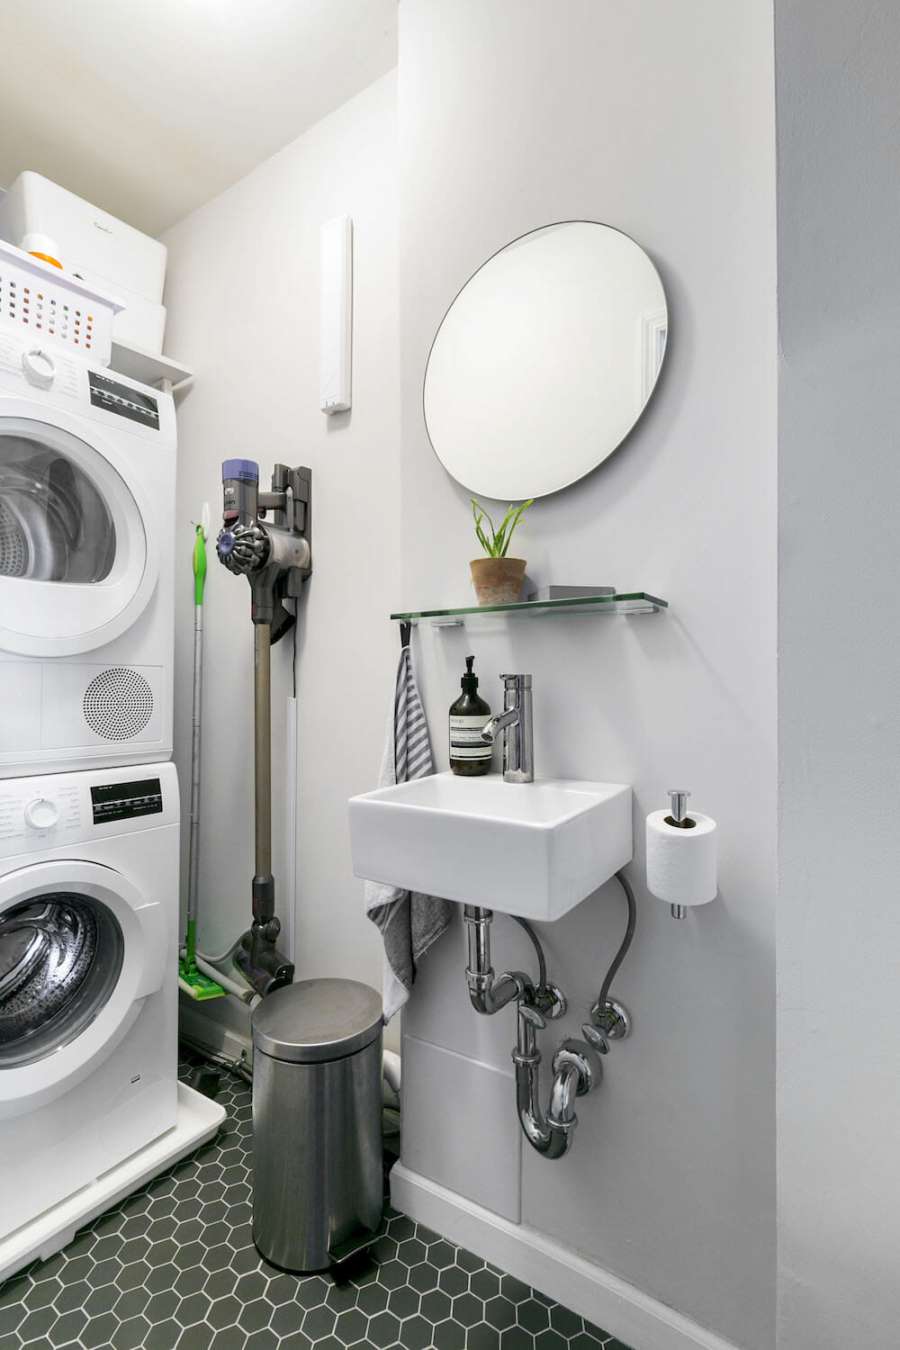 Small Laundry Room Ideas for Apartment, Condo and Co-op Dwellers